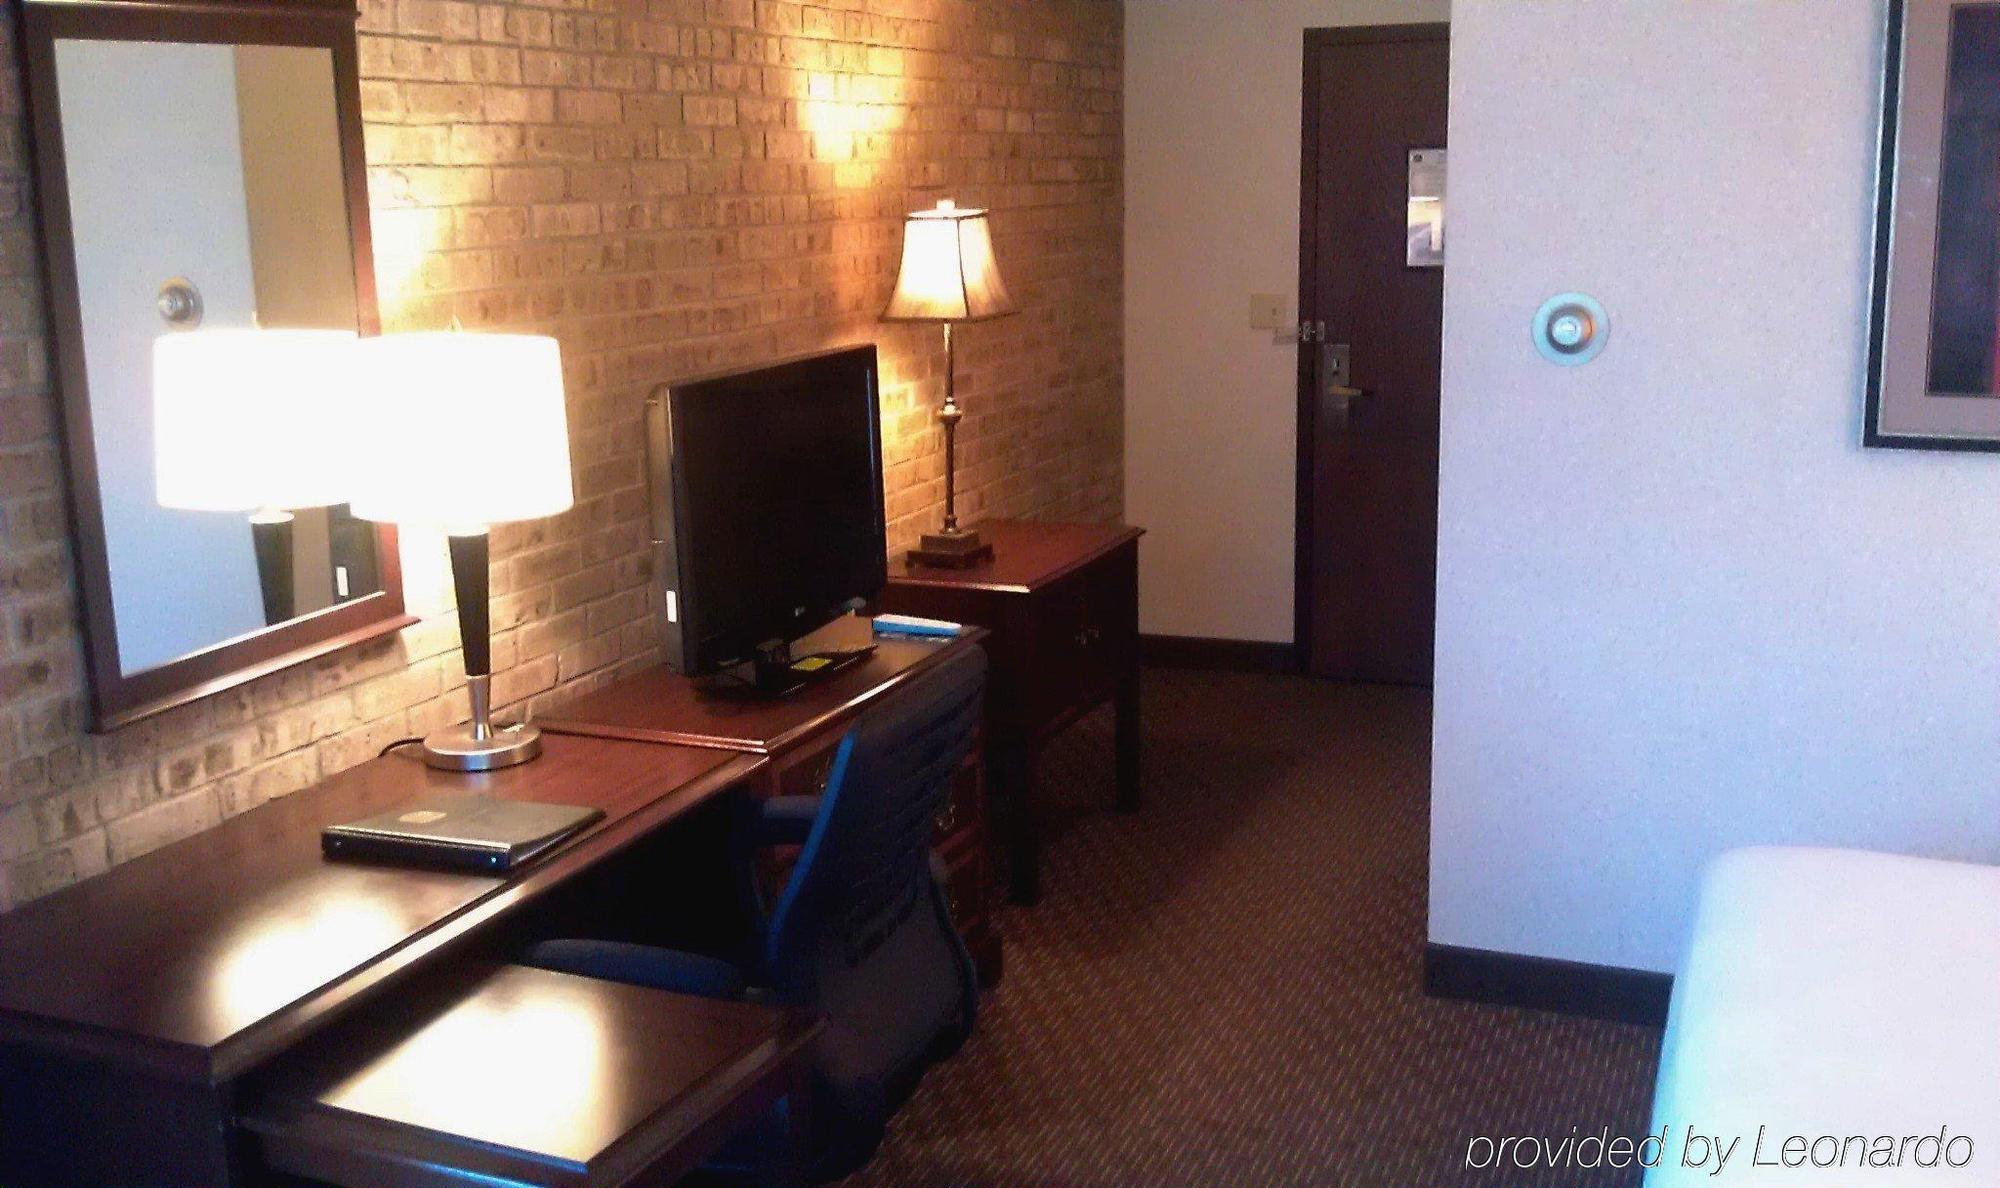 Clock Tower Resort And Conference Center - Rockford Room photo